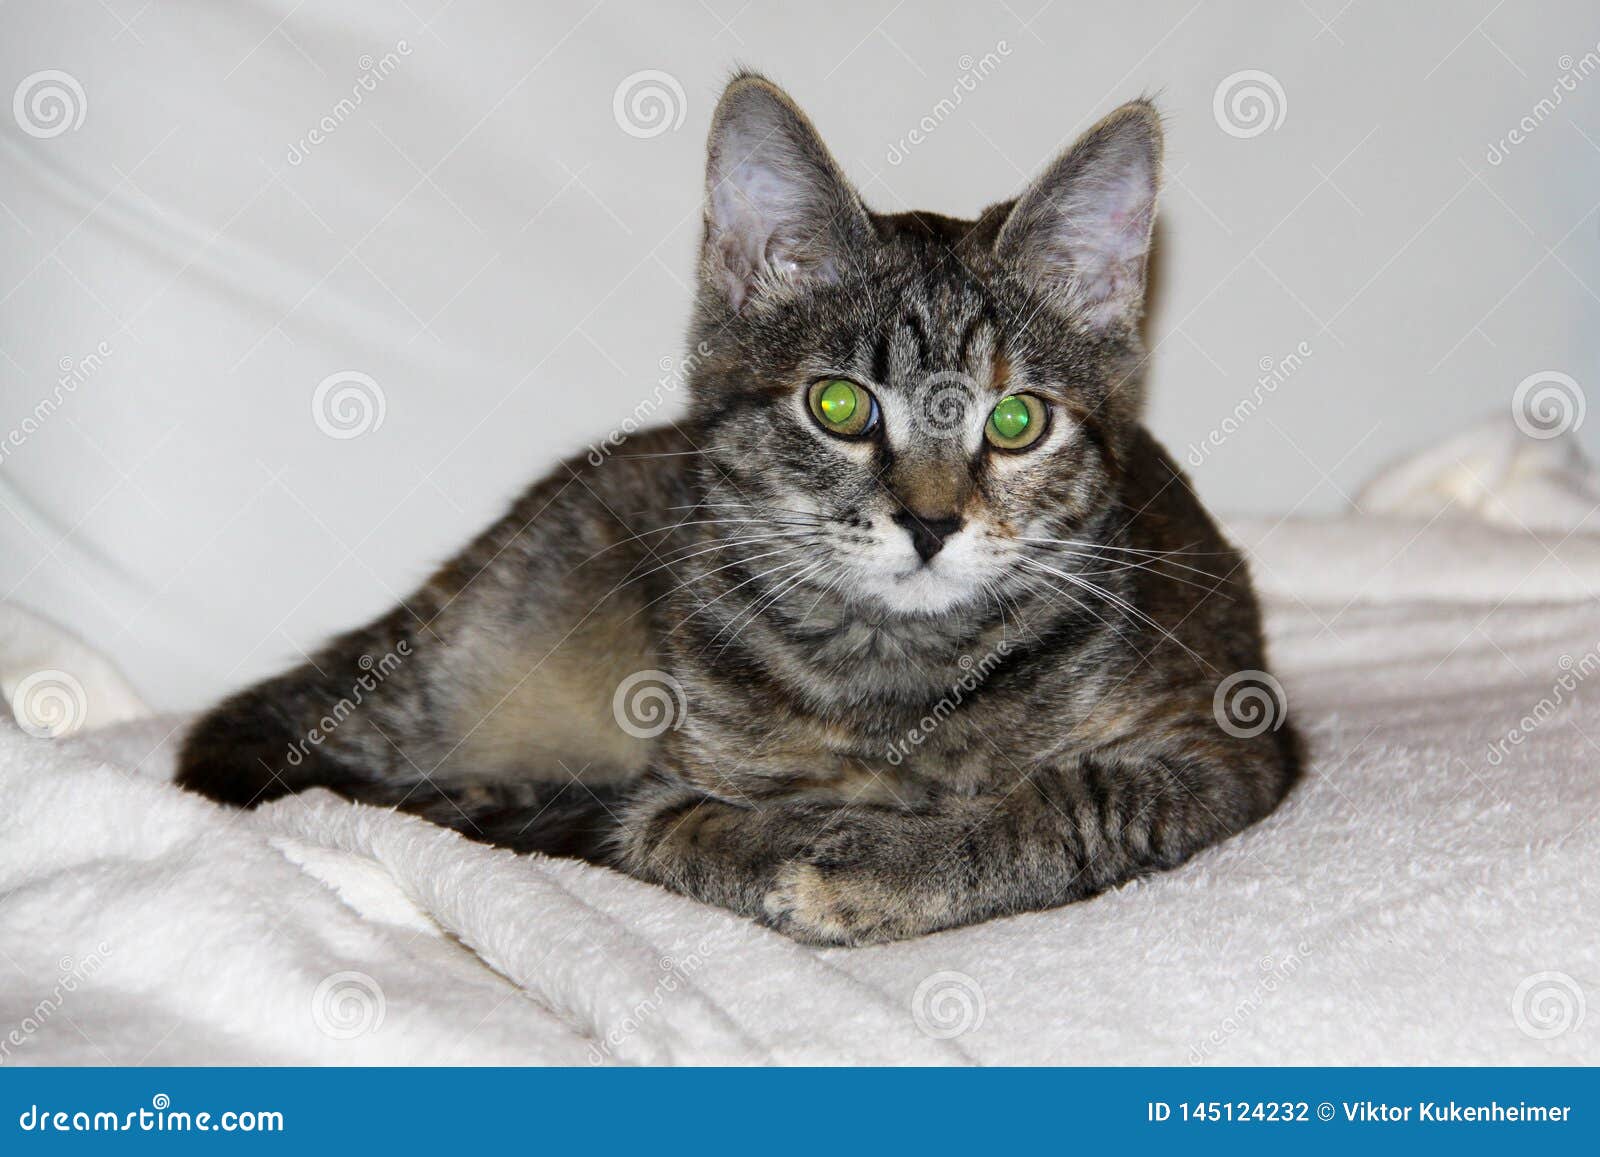 domestic cat with big green eyes